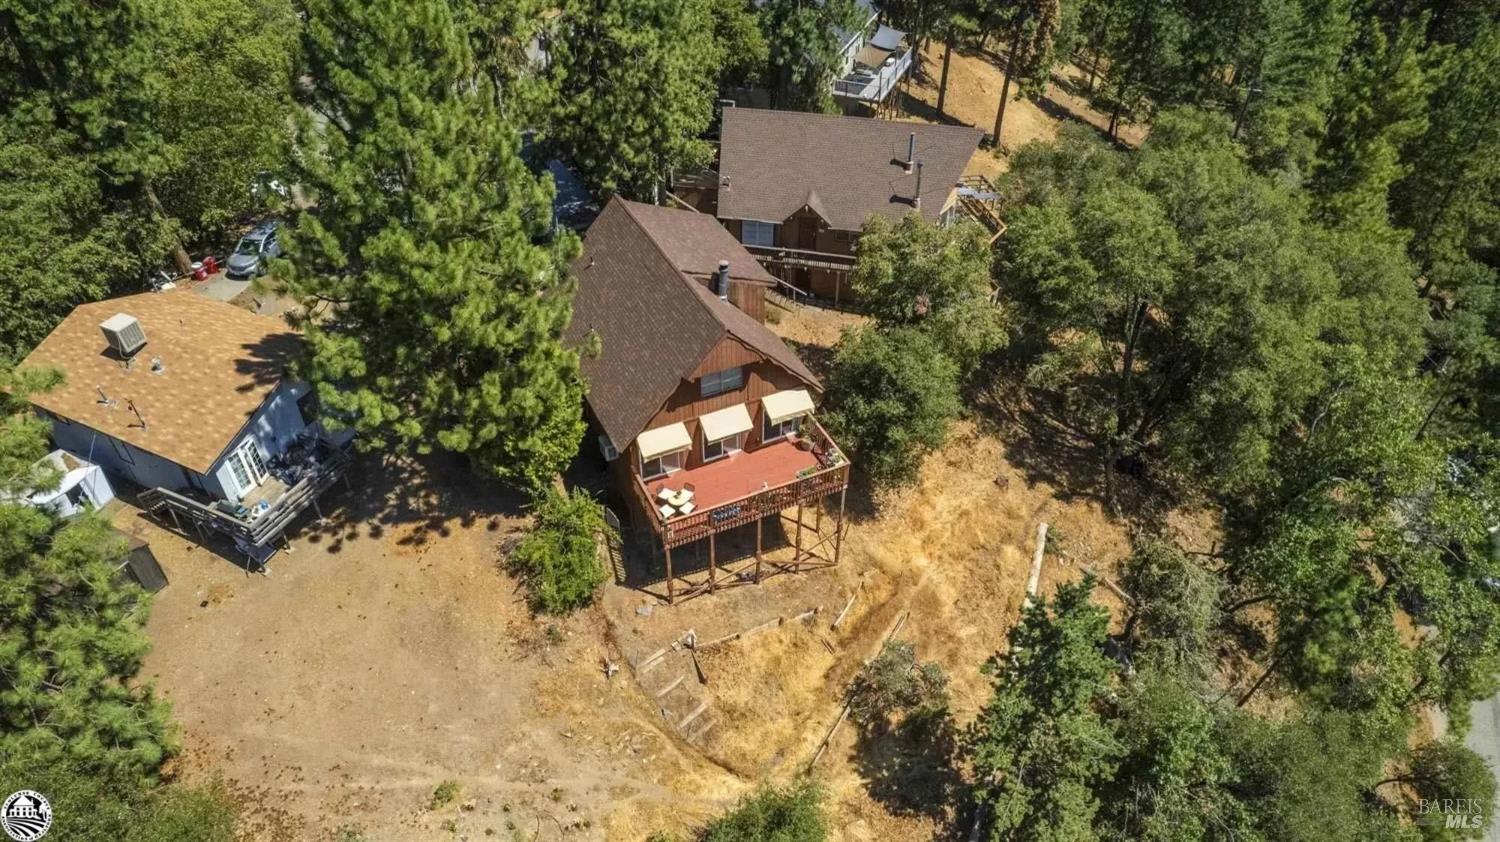 an aerial view of a house with yard